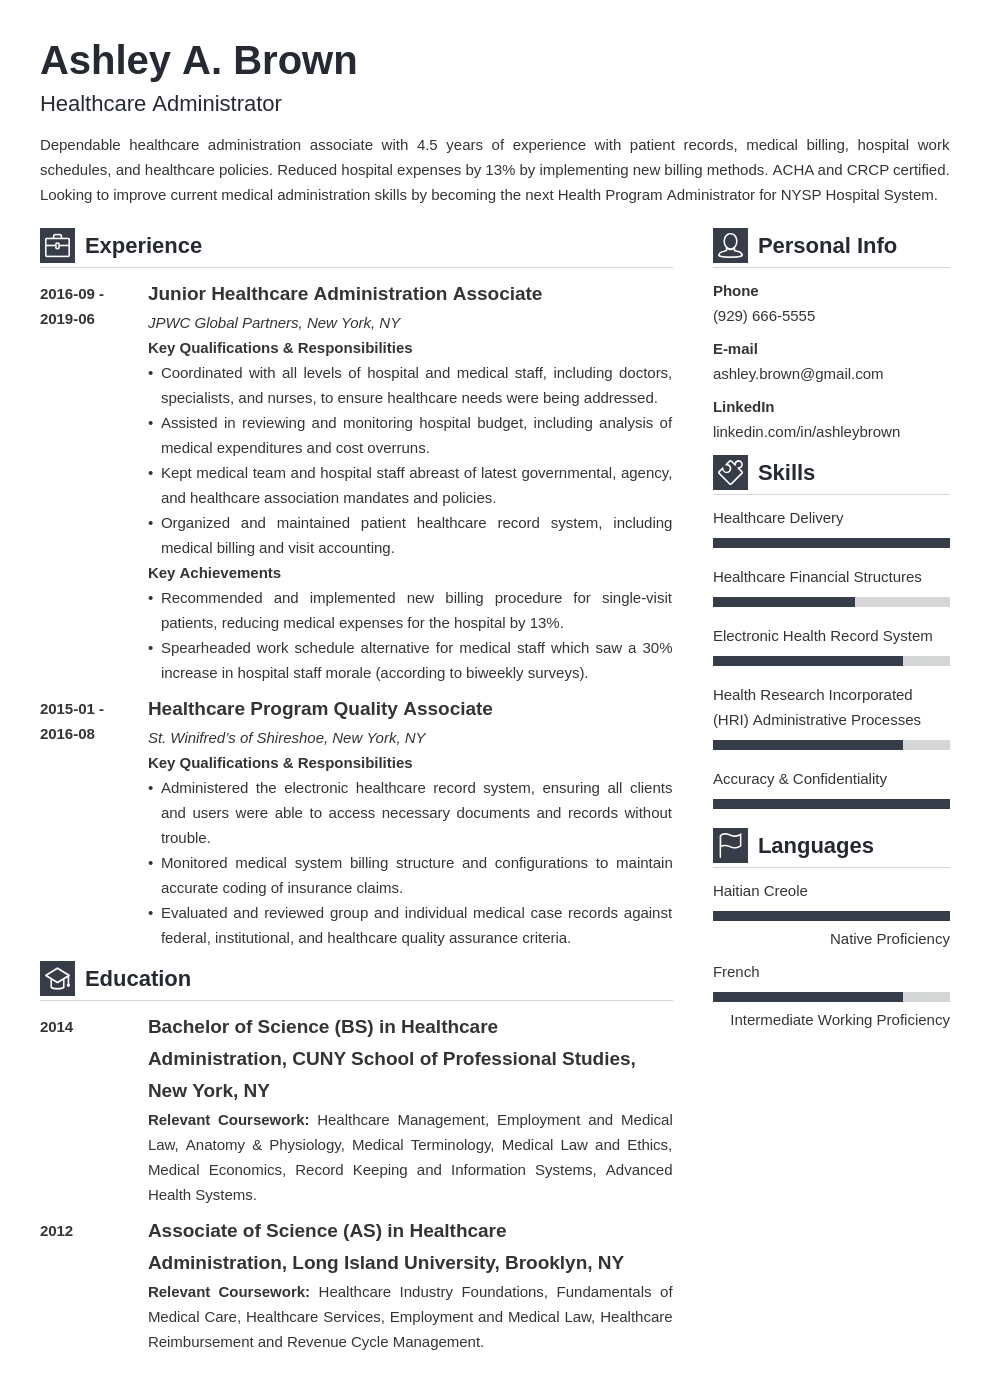 Healthcare Professional Resume Guide & Samples